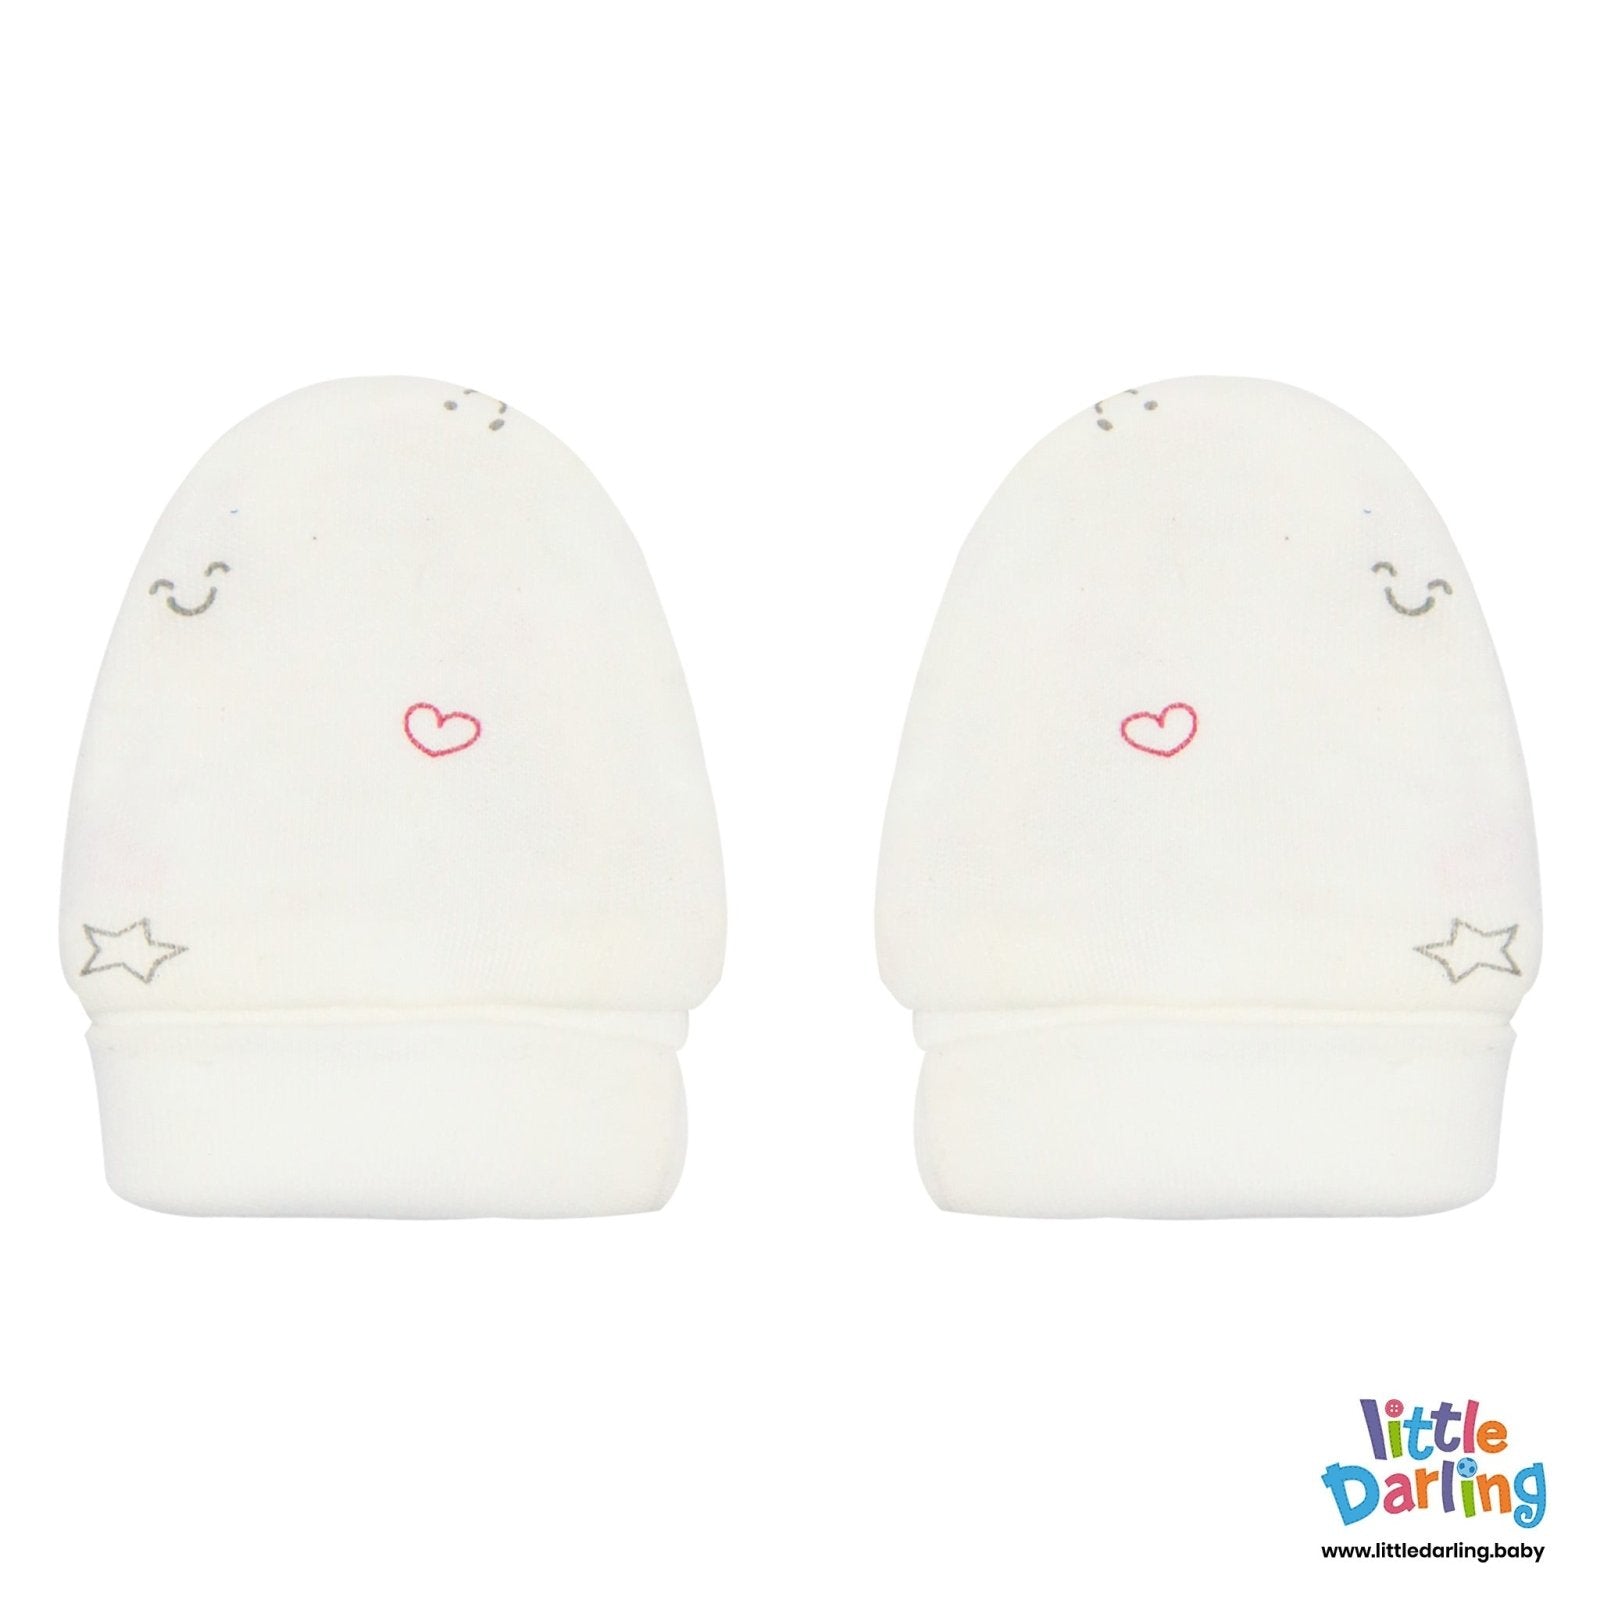 Baby Mittens Pair Pk Of 2 by Little Darling